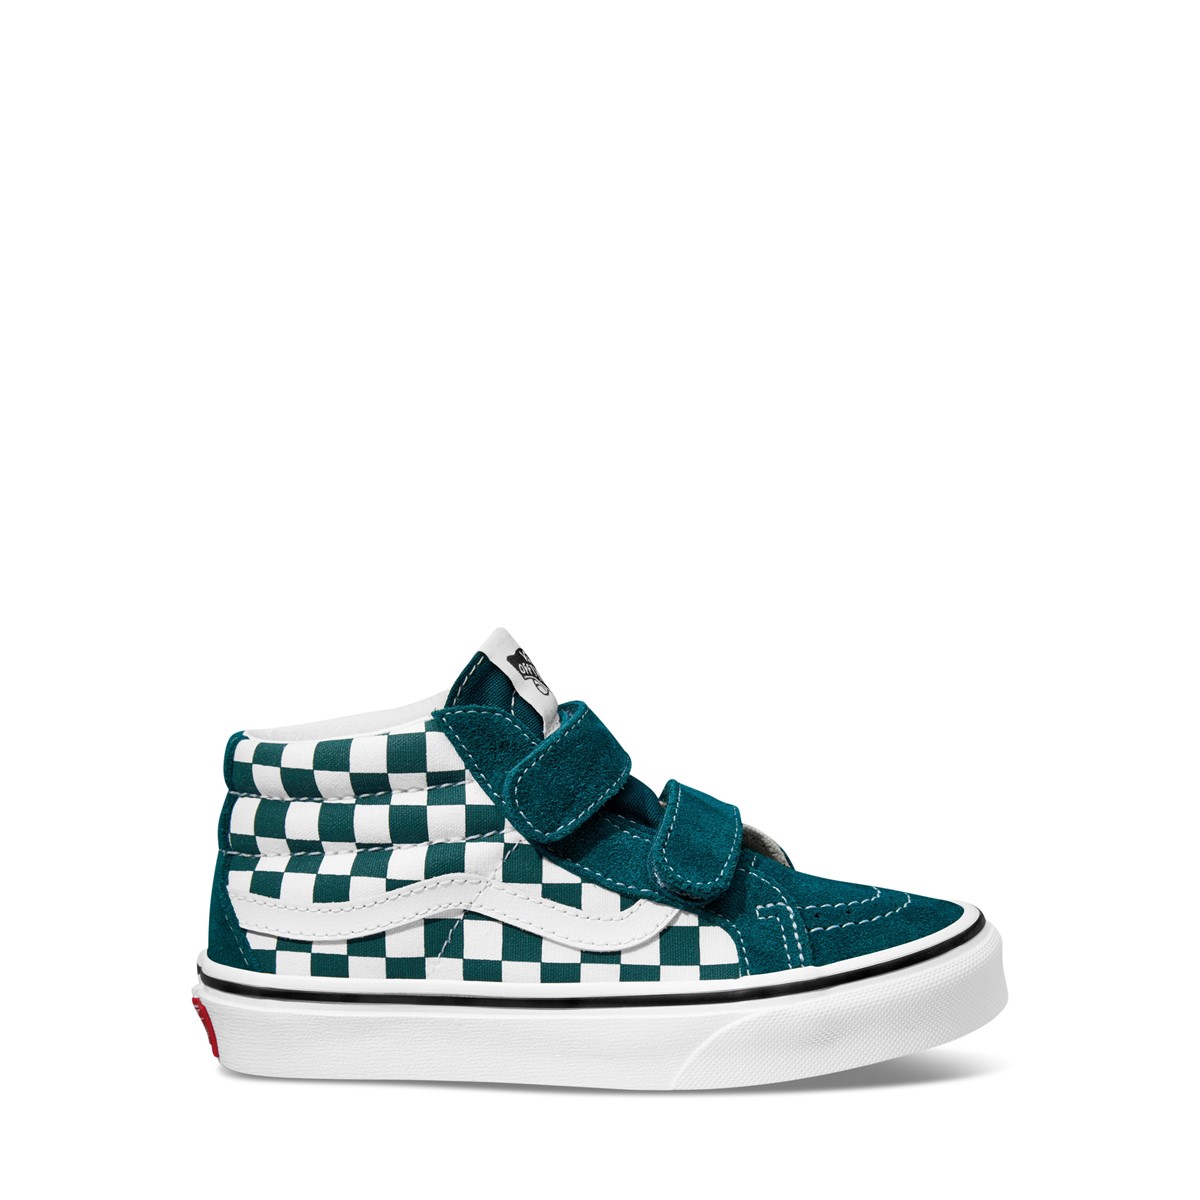 Little Kids' Checkerboard Sk8 Mid Reissue V Sneakers in Teal/White